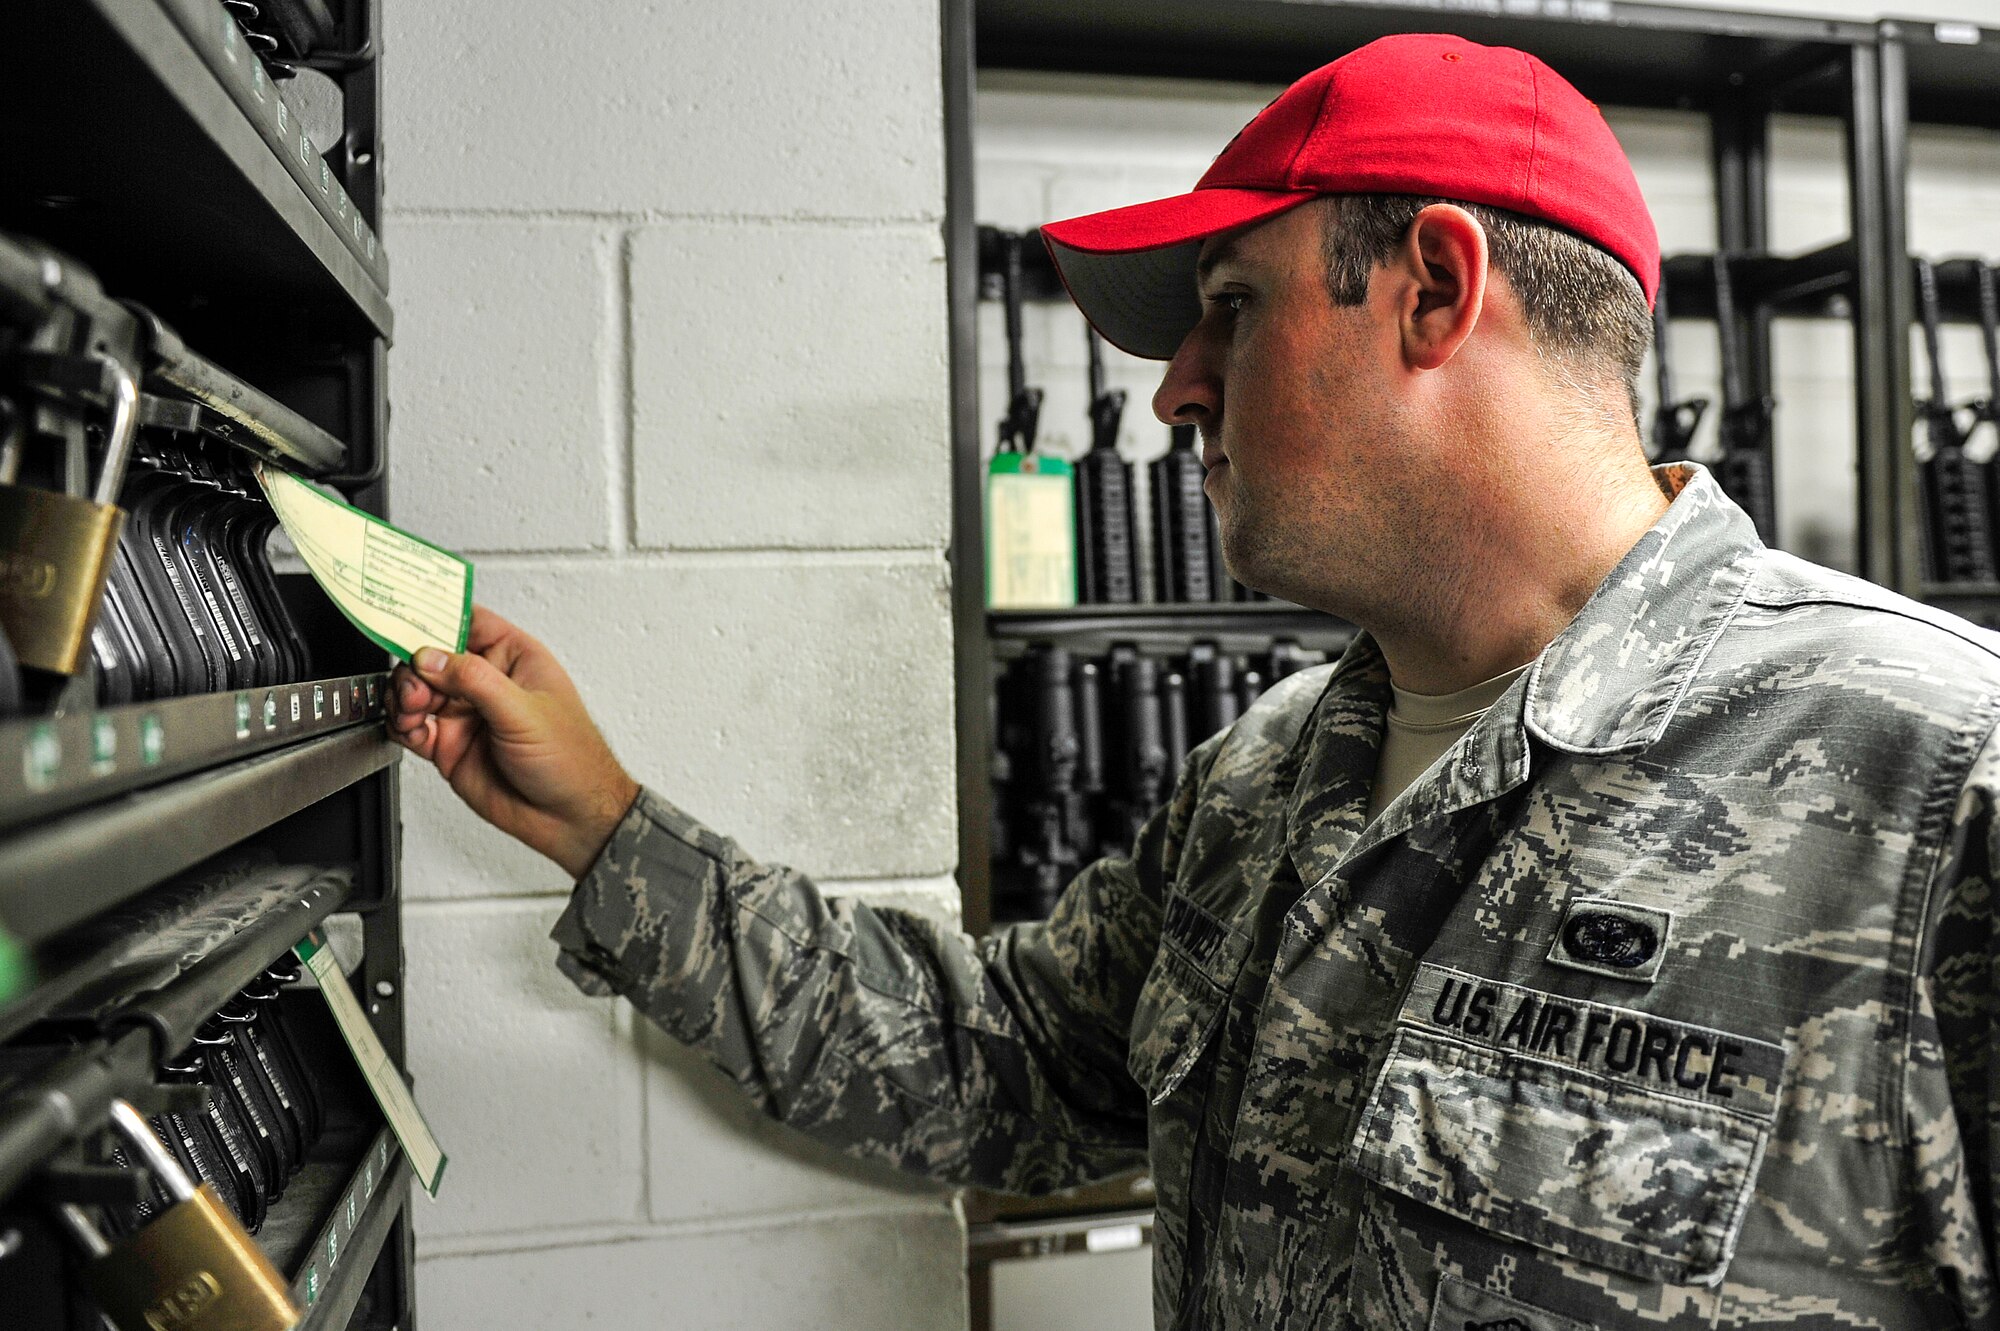 Senior Airman Christopher Crawley, 1st Special Operations Security Forces Squadron Combat Arms Training and Maintenance instructor, checks am M9 pistol maintenance tag at Hurlburt Field, Fla., December 2, 2014. CATM instructors provide firing training and maintain all weapons used by CATM and Security Forces. (U.S. Air Force photo/Airman 1st Class Jeff Parkinson)